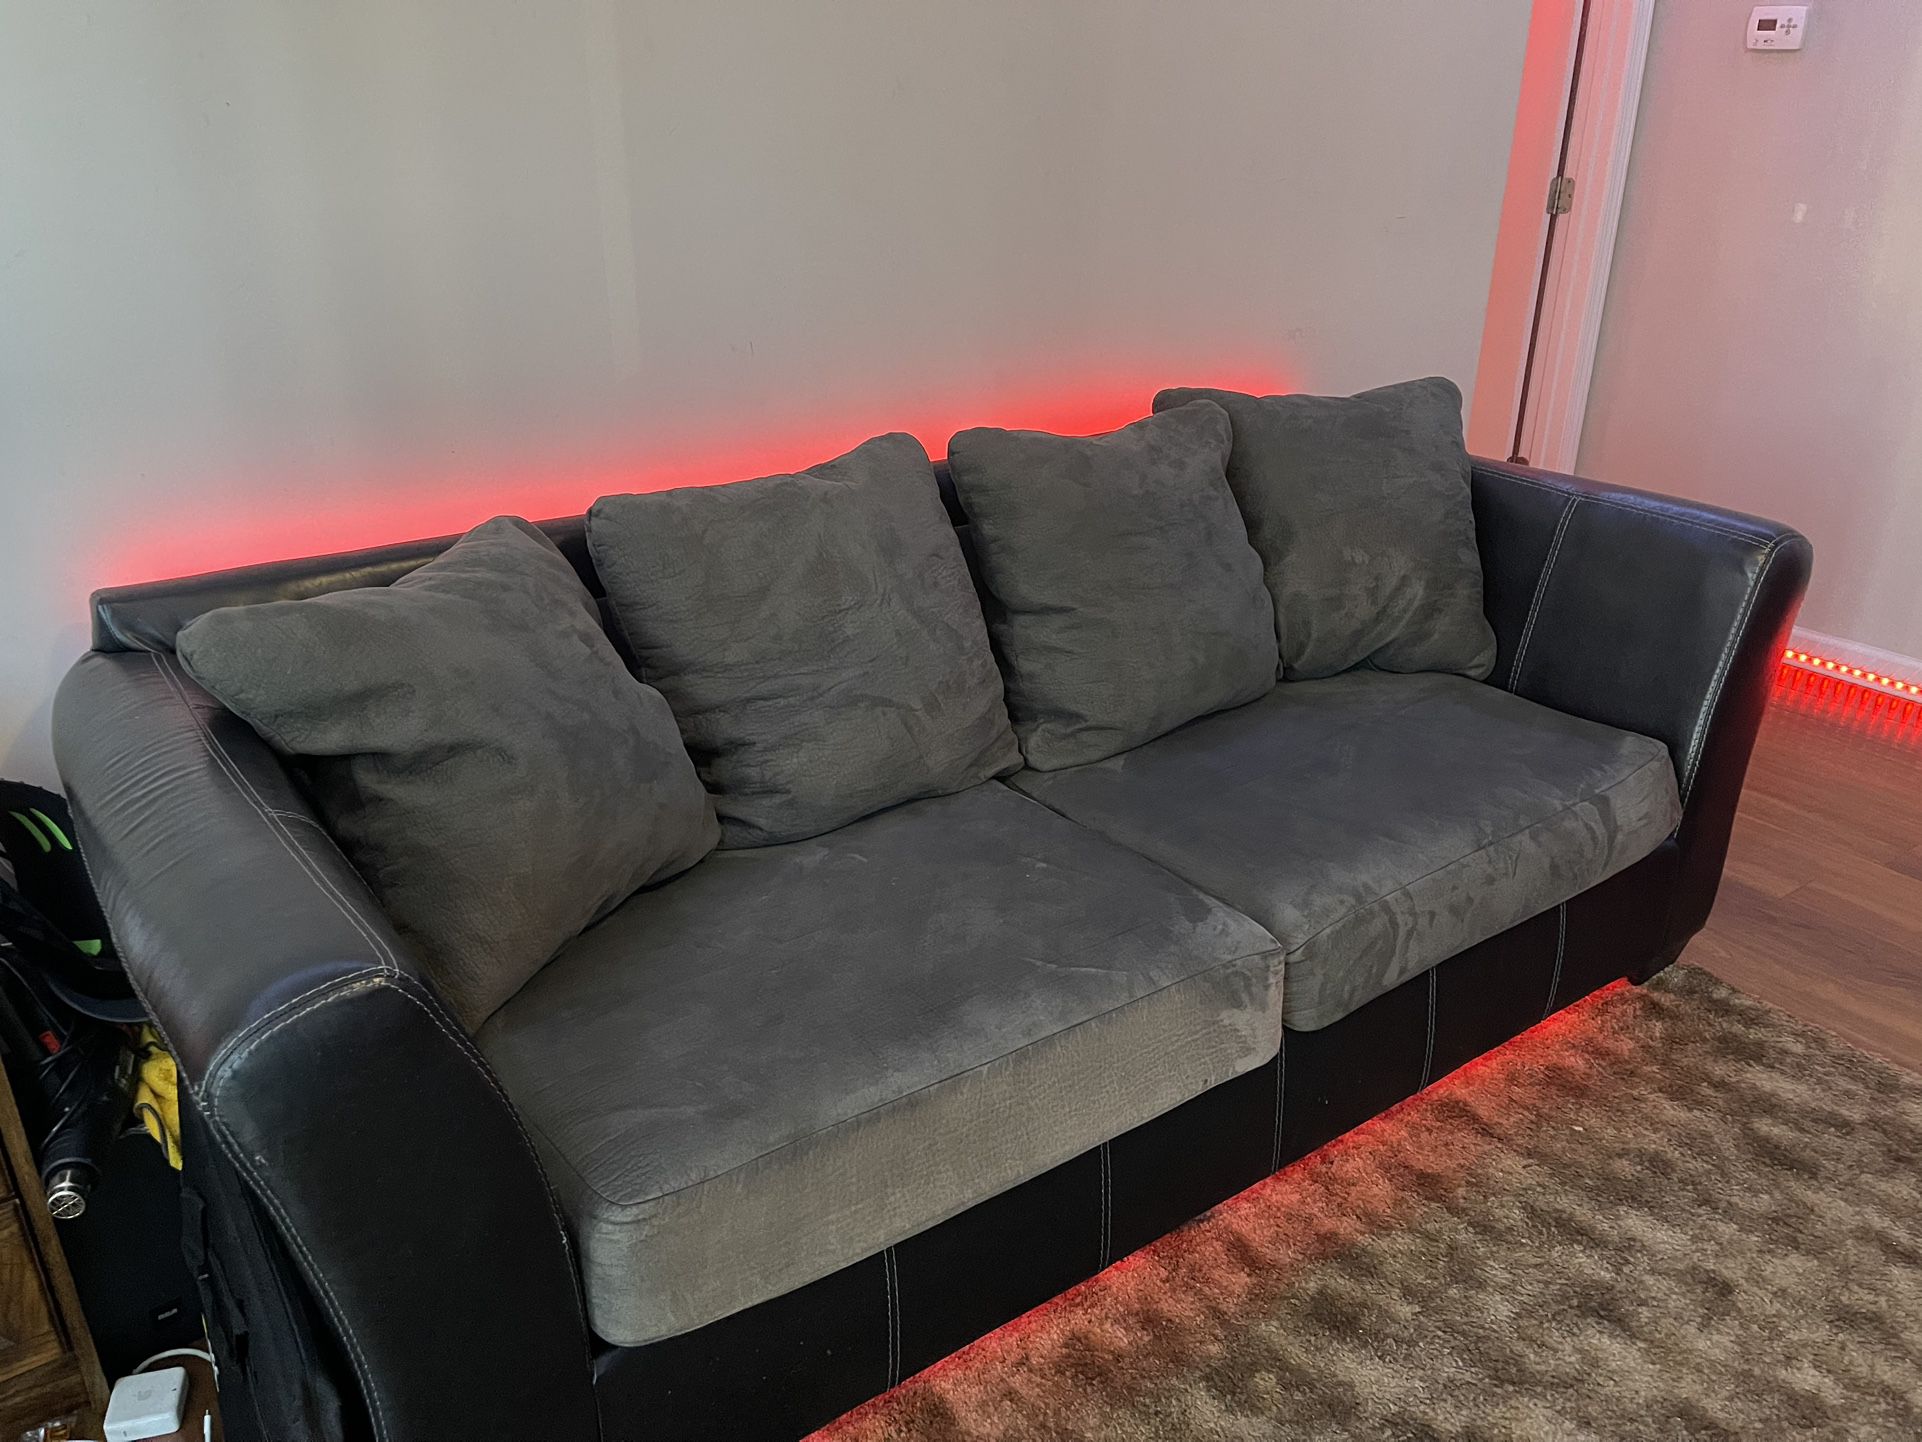 Black/Gray Leather And Suede Sofa (RGB LEDs)